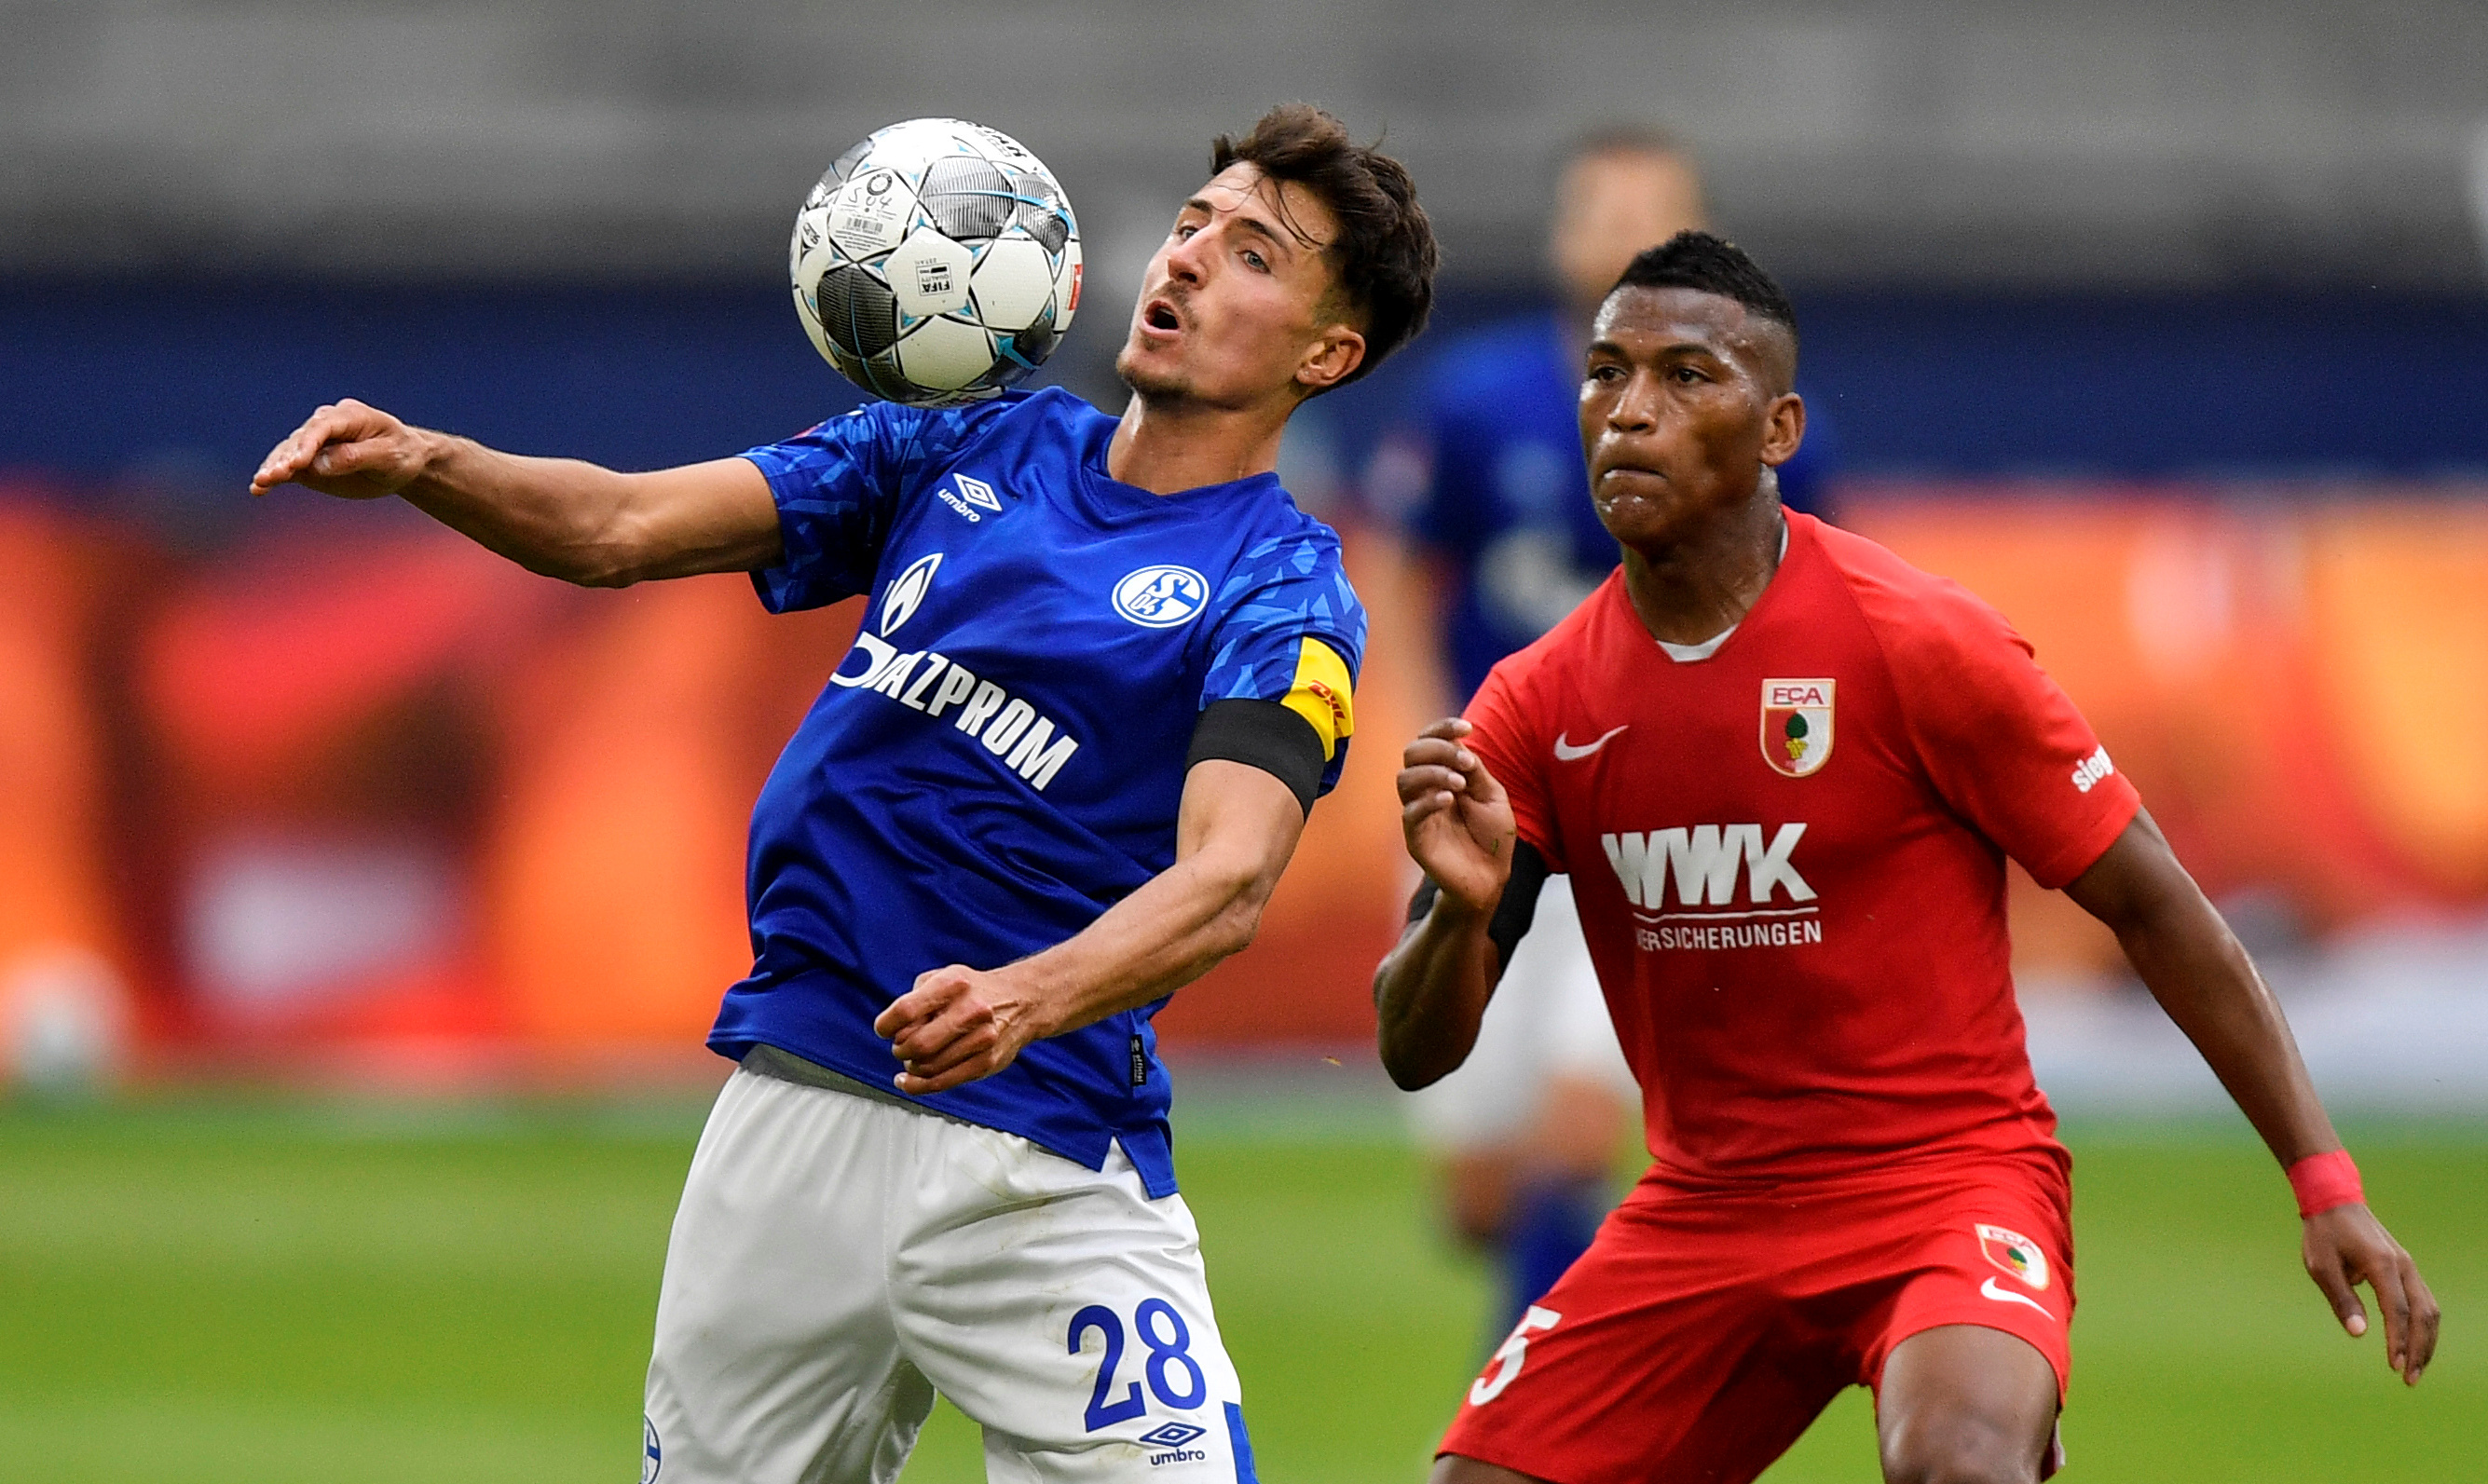 Schalke 04's Alessandro Schopf in action with FC Augsburg's Carlos Gruezo, as play resumes behind closed doors following the outbreak of the coronavirus disease (COVID-19) during the Bundesliga match between Schalke 04 and FC Augsburg, at Veltins-Arena, in Gelsenkirchen, Germany, on May 24, 2020. Photo: Martin Meissner/Pool via Reuters